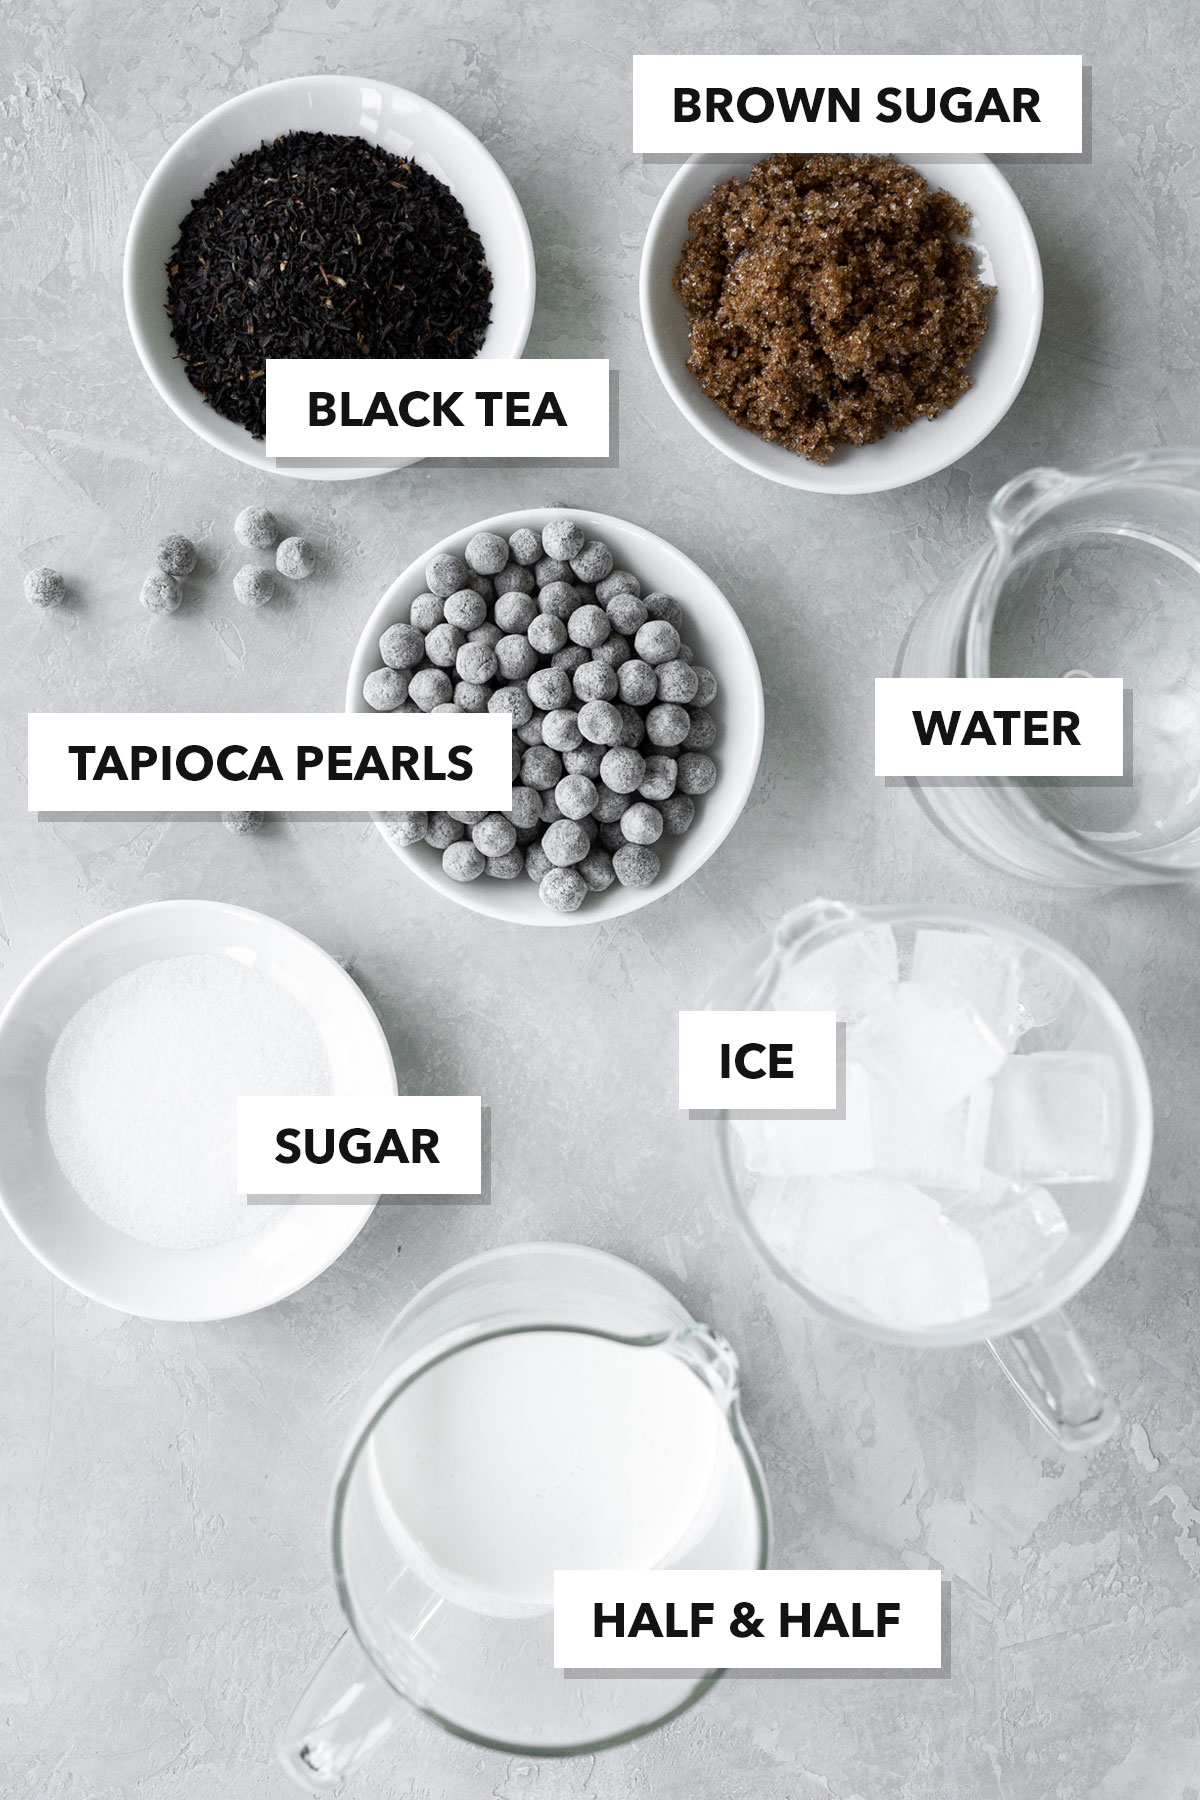 Ingredients to make bubble tea at home.